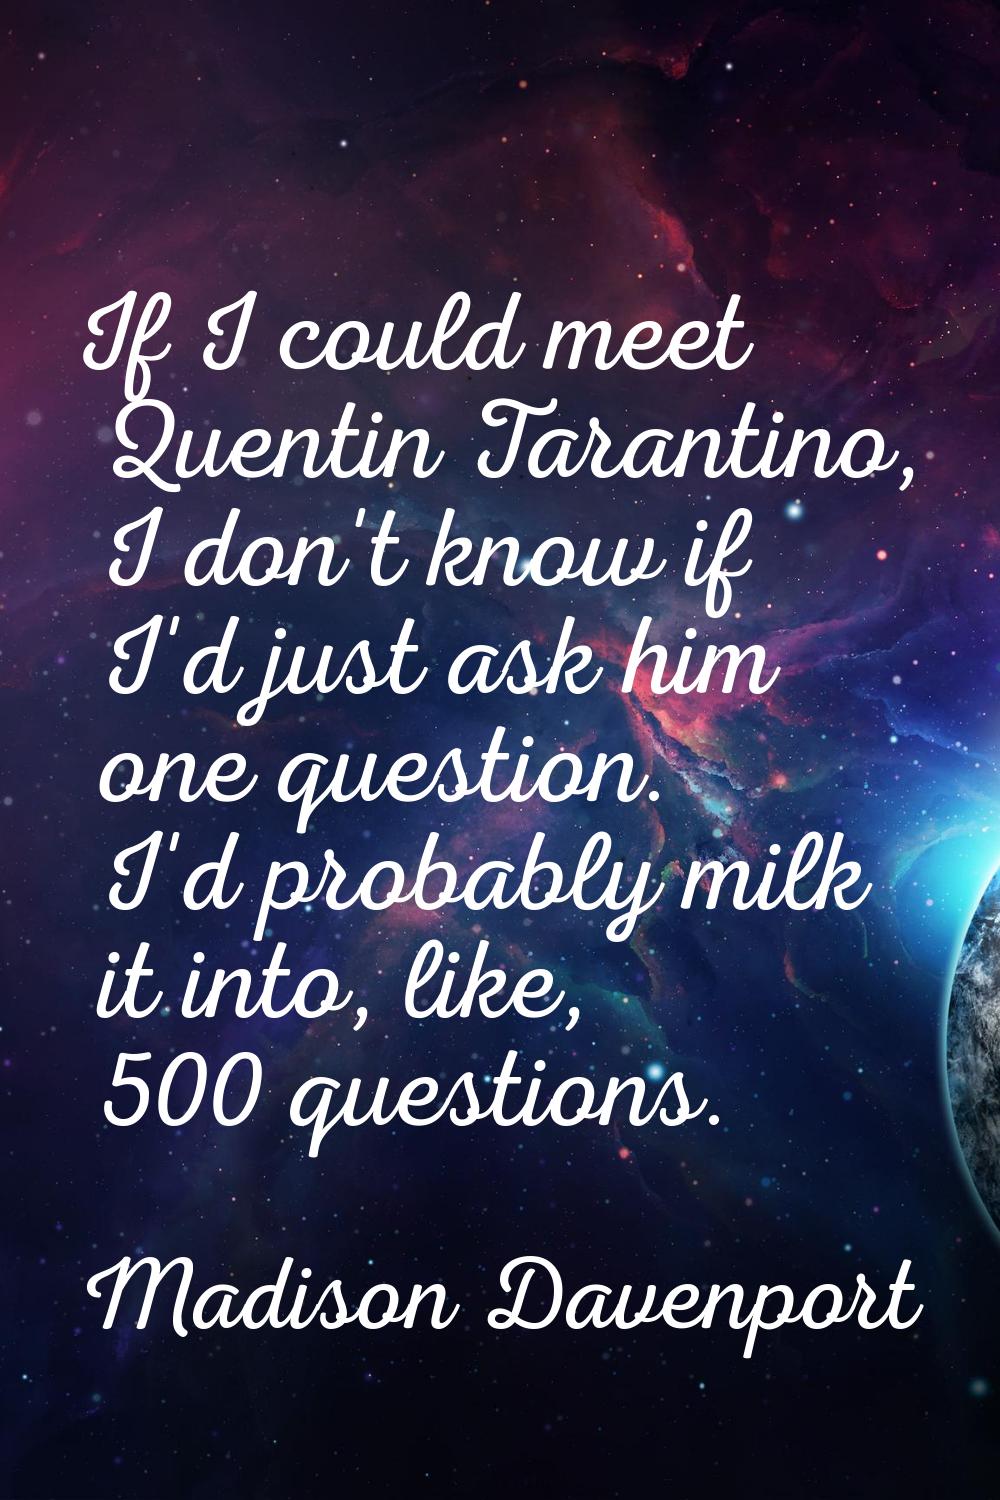 If I could meet Quentin Tarantino, I don't know if I'd just ask him one question. I'd probably milk